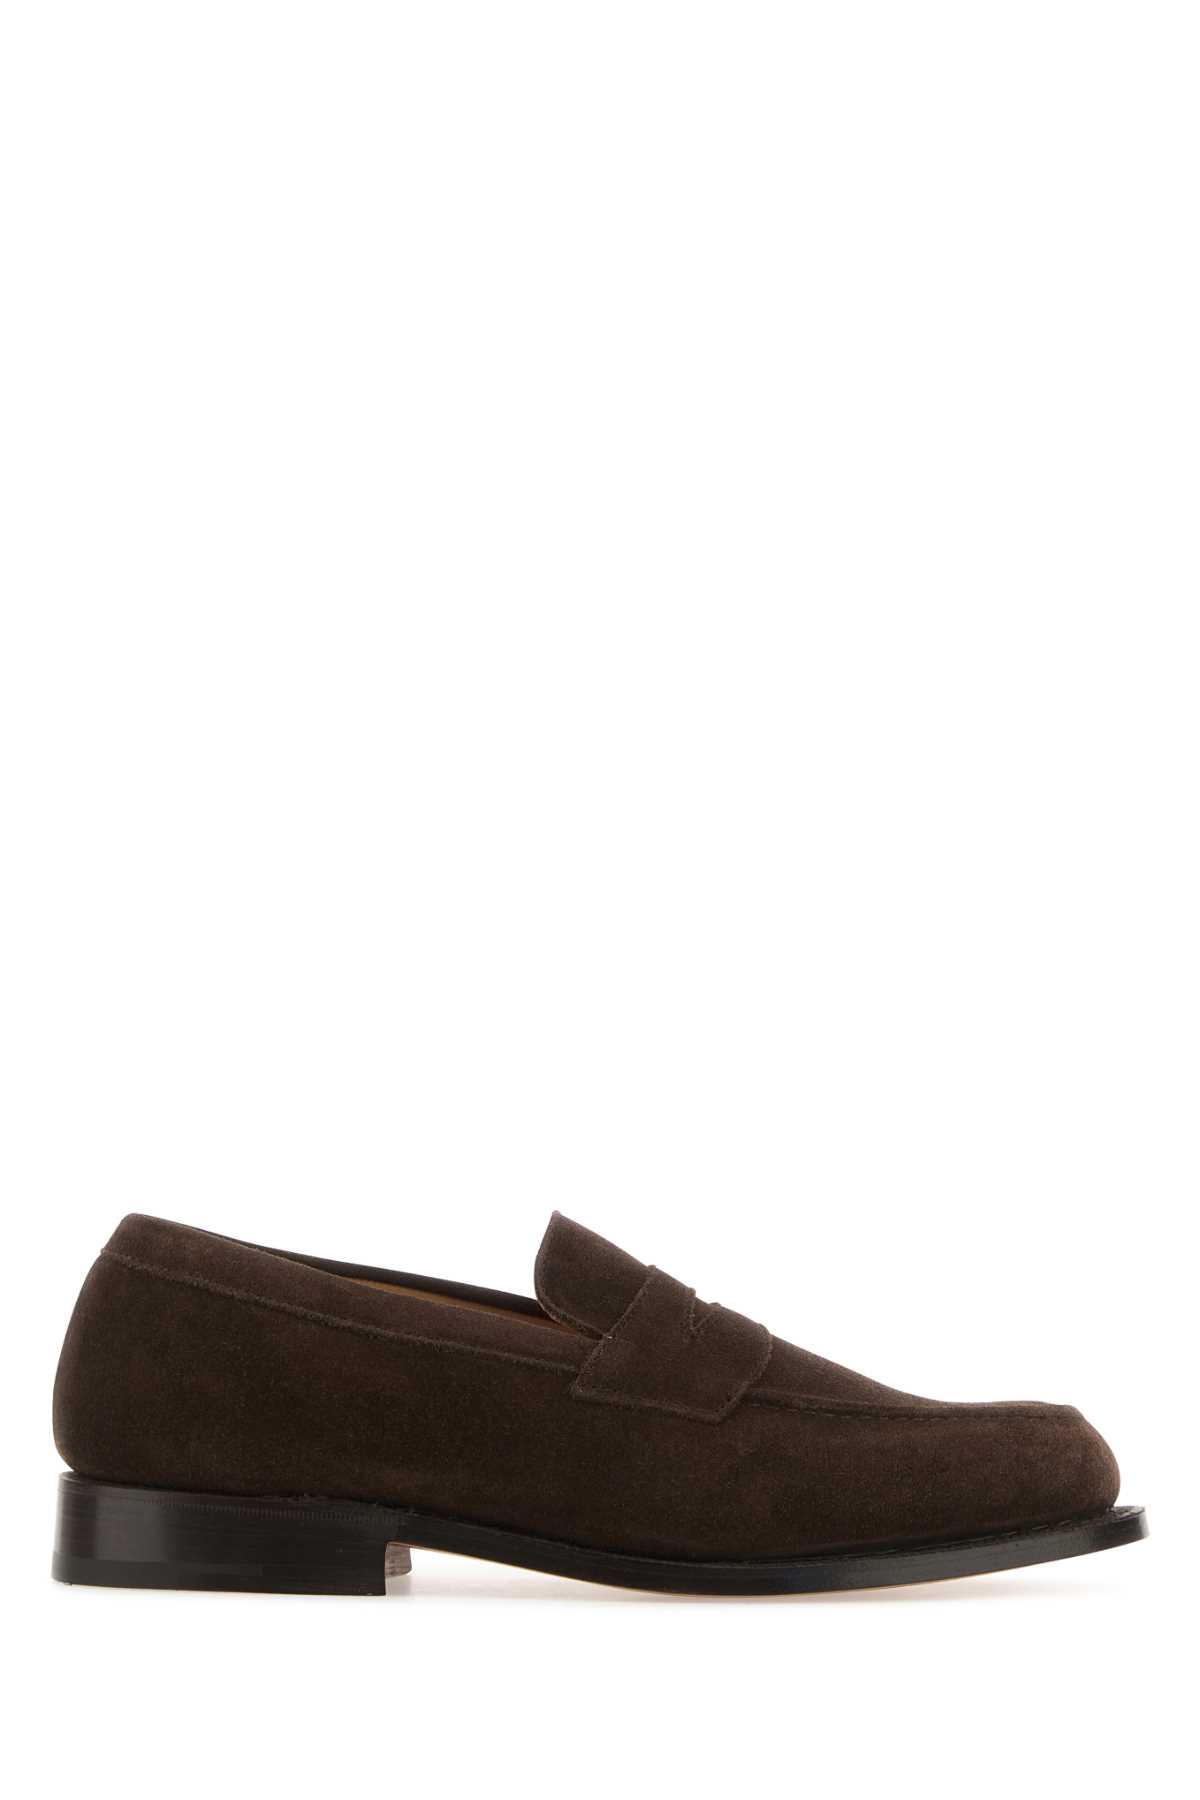 Shop Tricker's Brown Suede Repello Loafers In Cafe